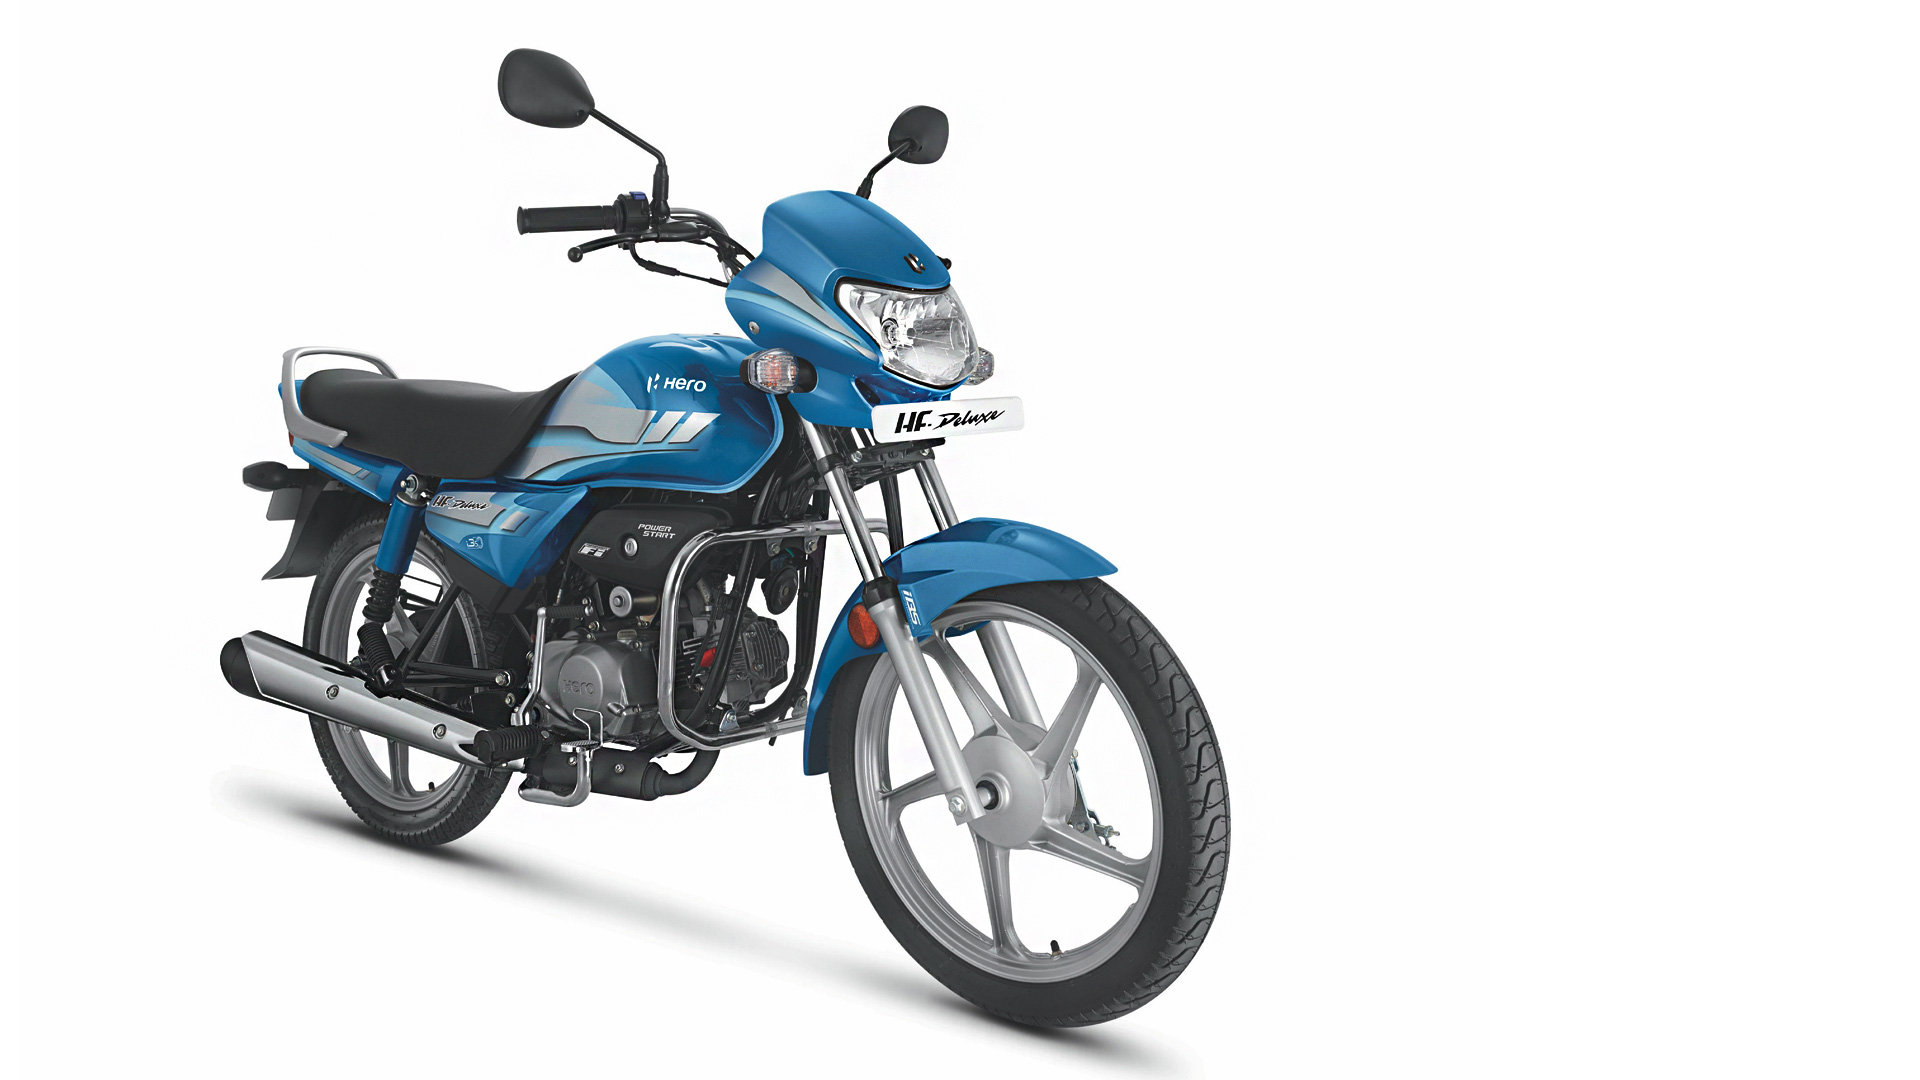 Hero Hf Deluxe 2020 Price Mileage Reviews Specification